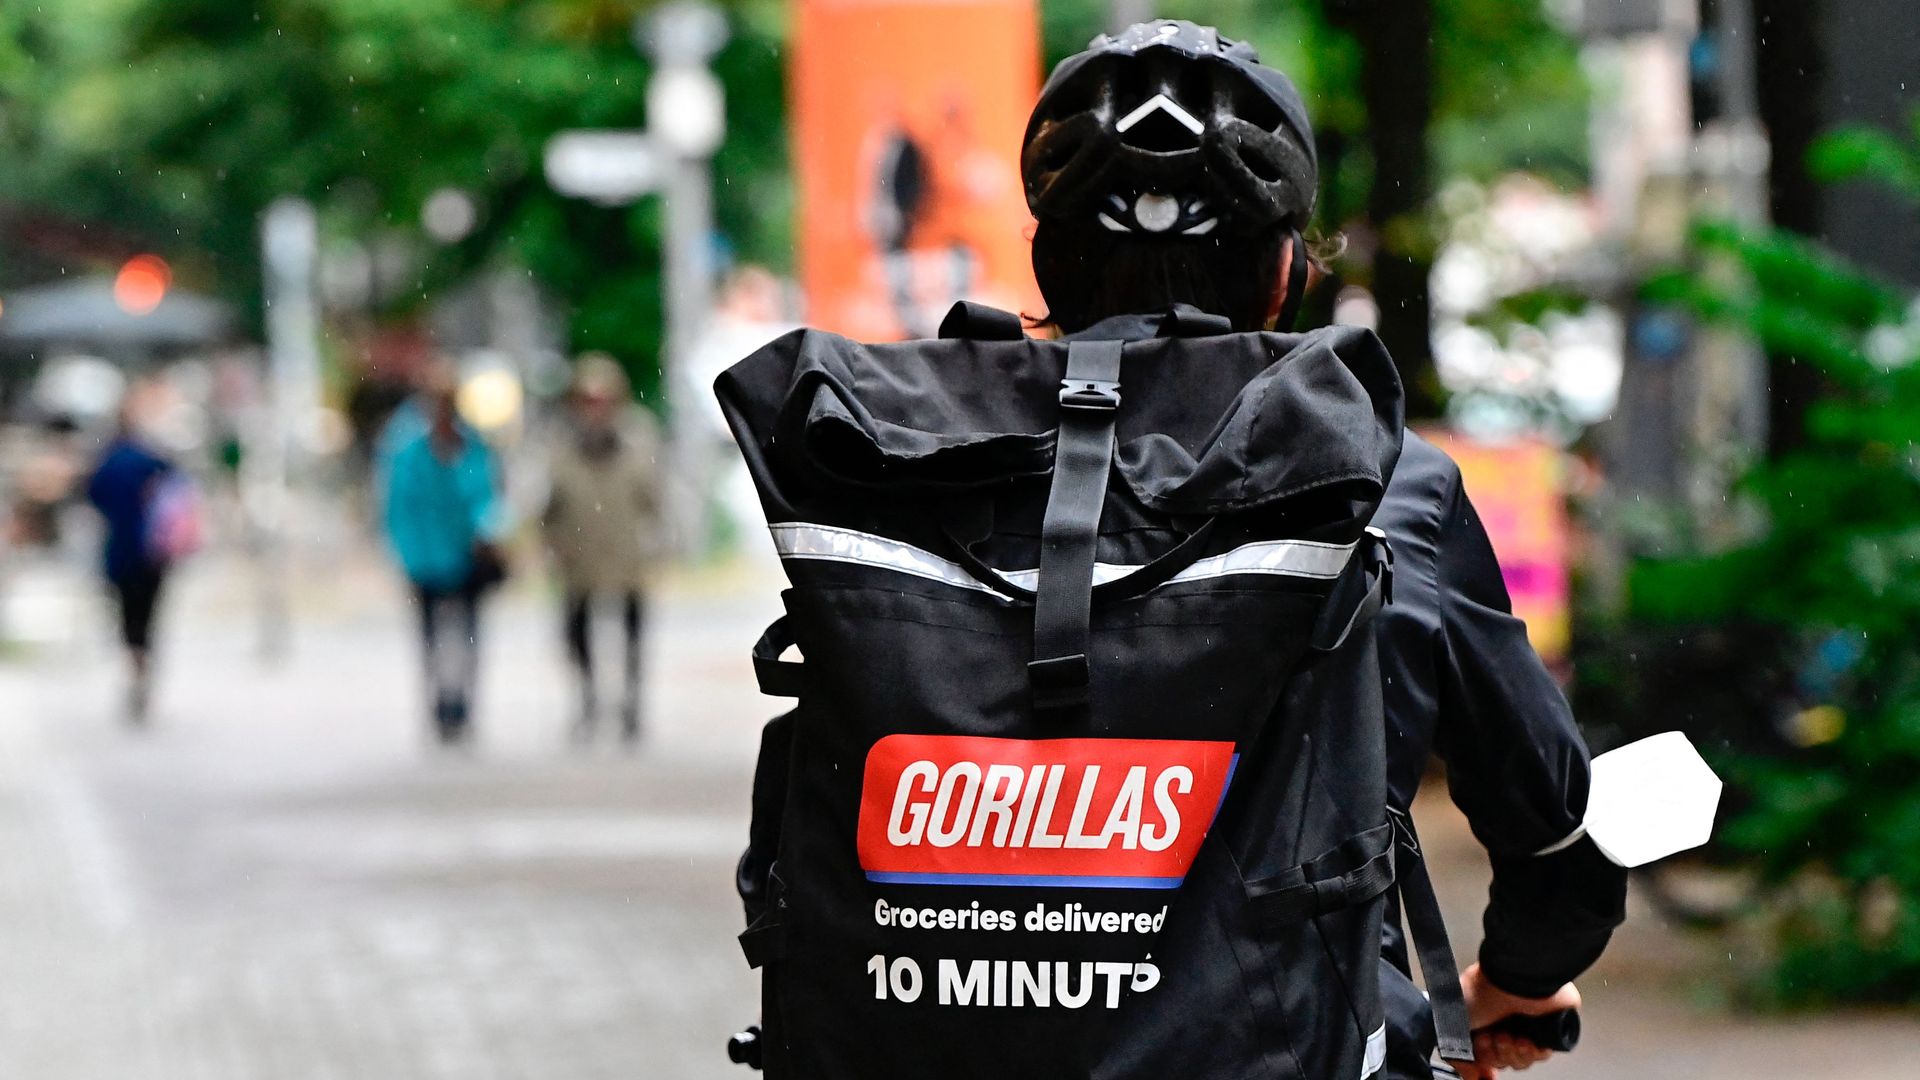 A bicycle courier of grocery delivery company Gorillas wears a backpack with the logo of the startup on his way to deliver purchases in Berlin.